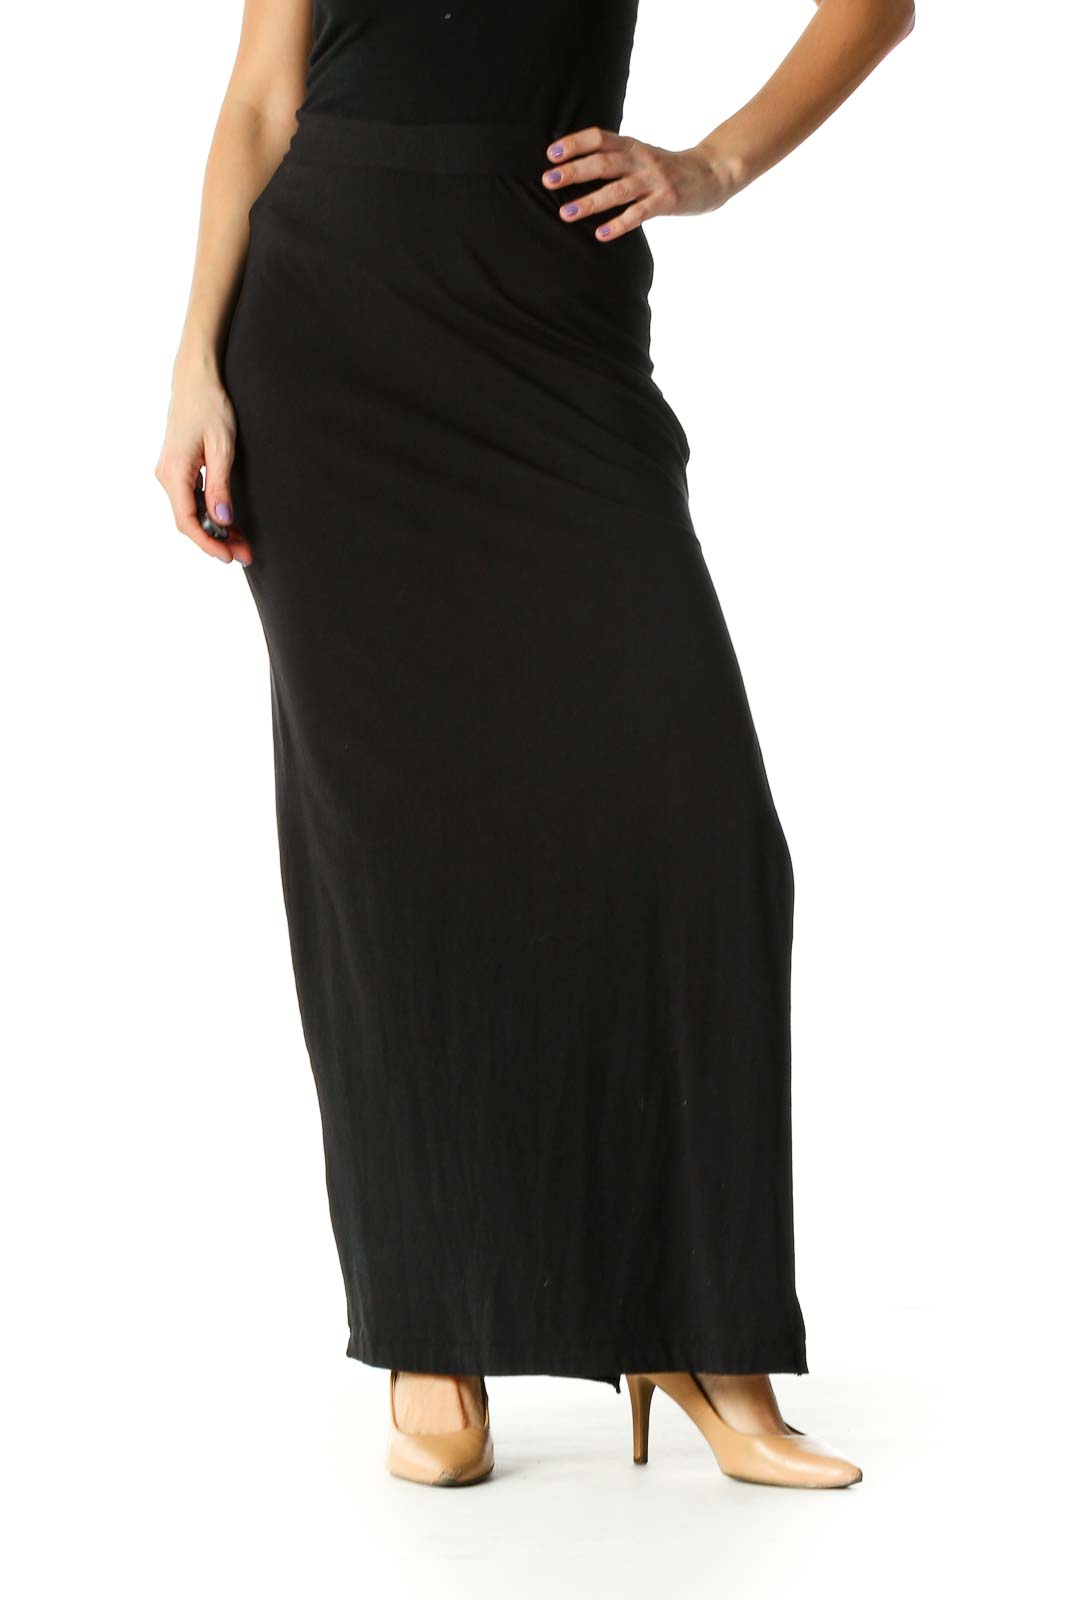 Black Solid Chic Skirt Front